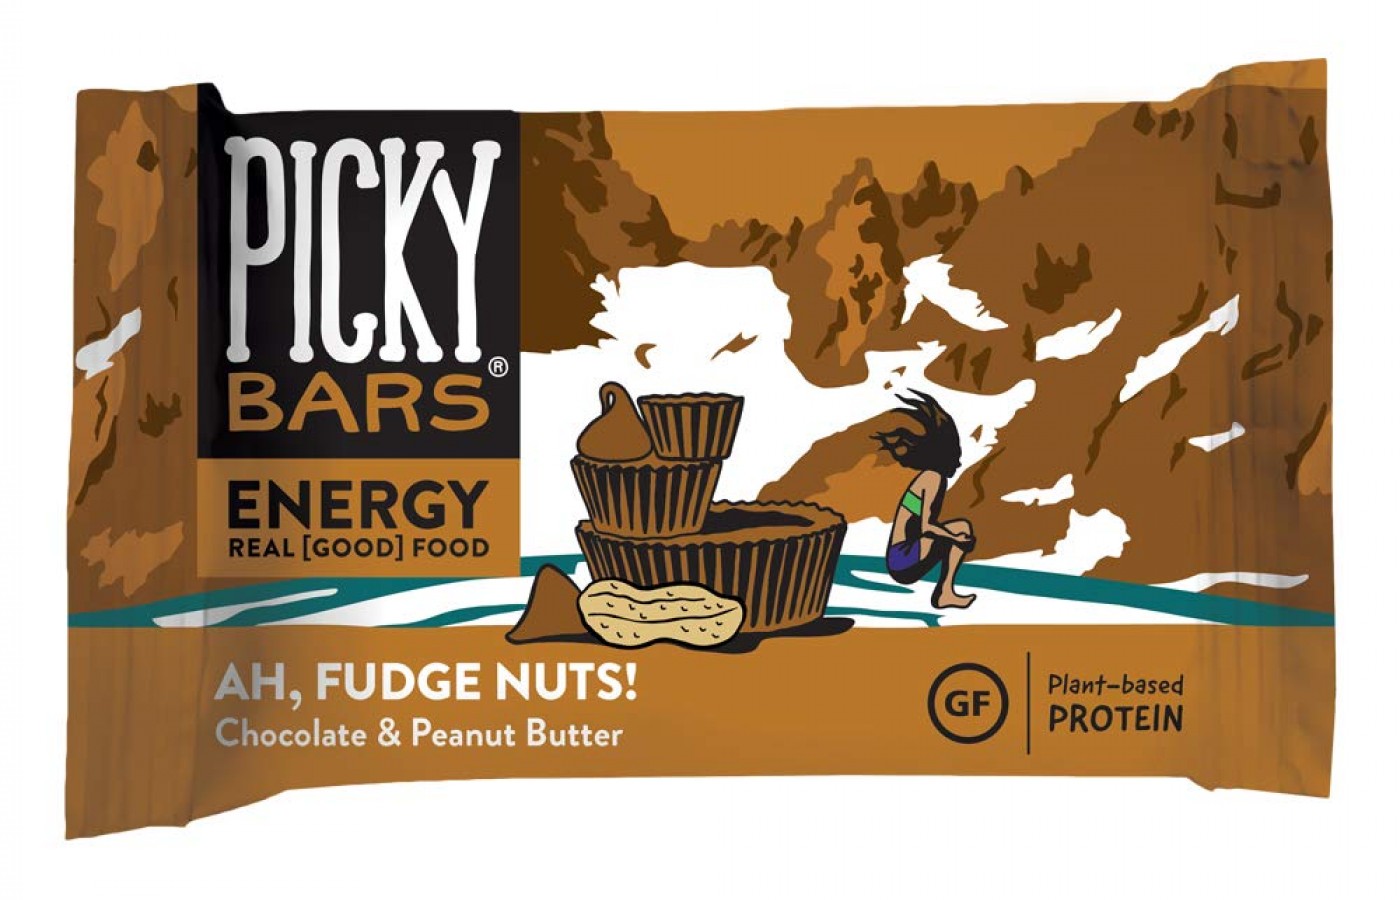 One of the Picky Bar favorites, this is a chocolate peanut butter flavor.